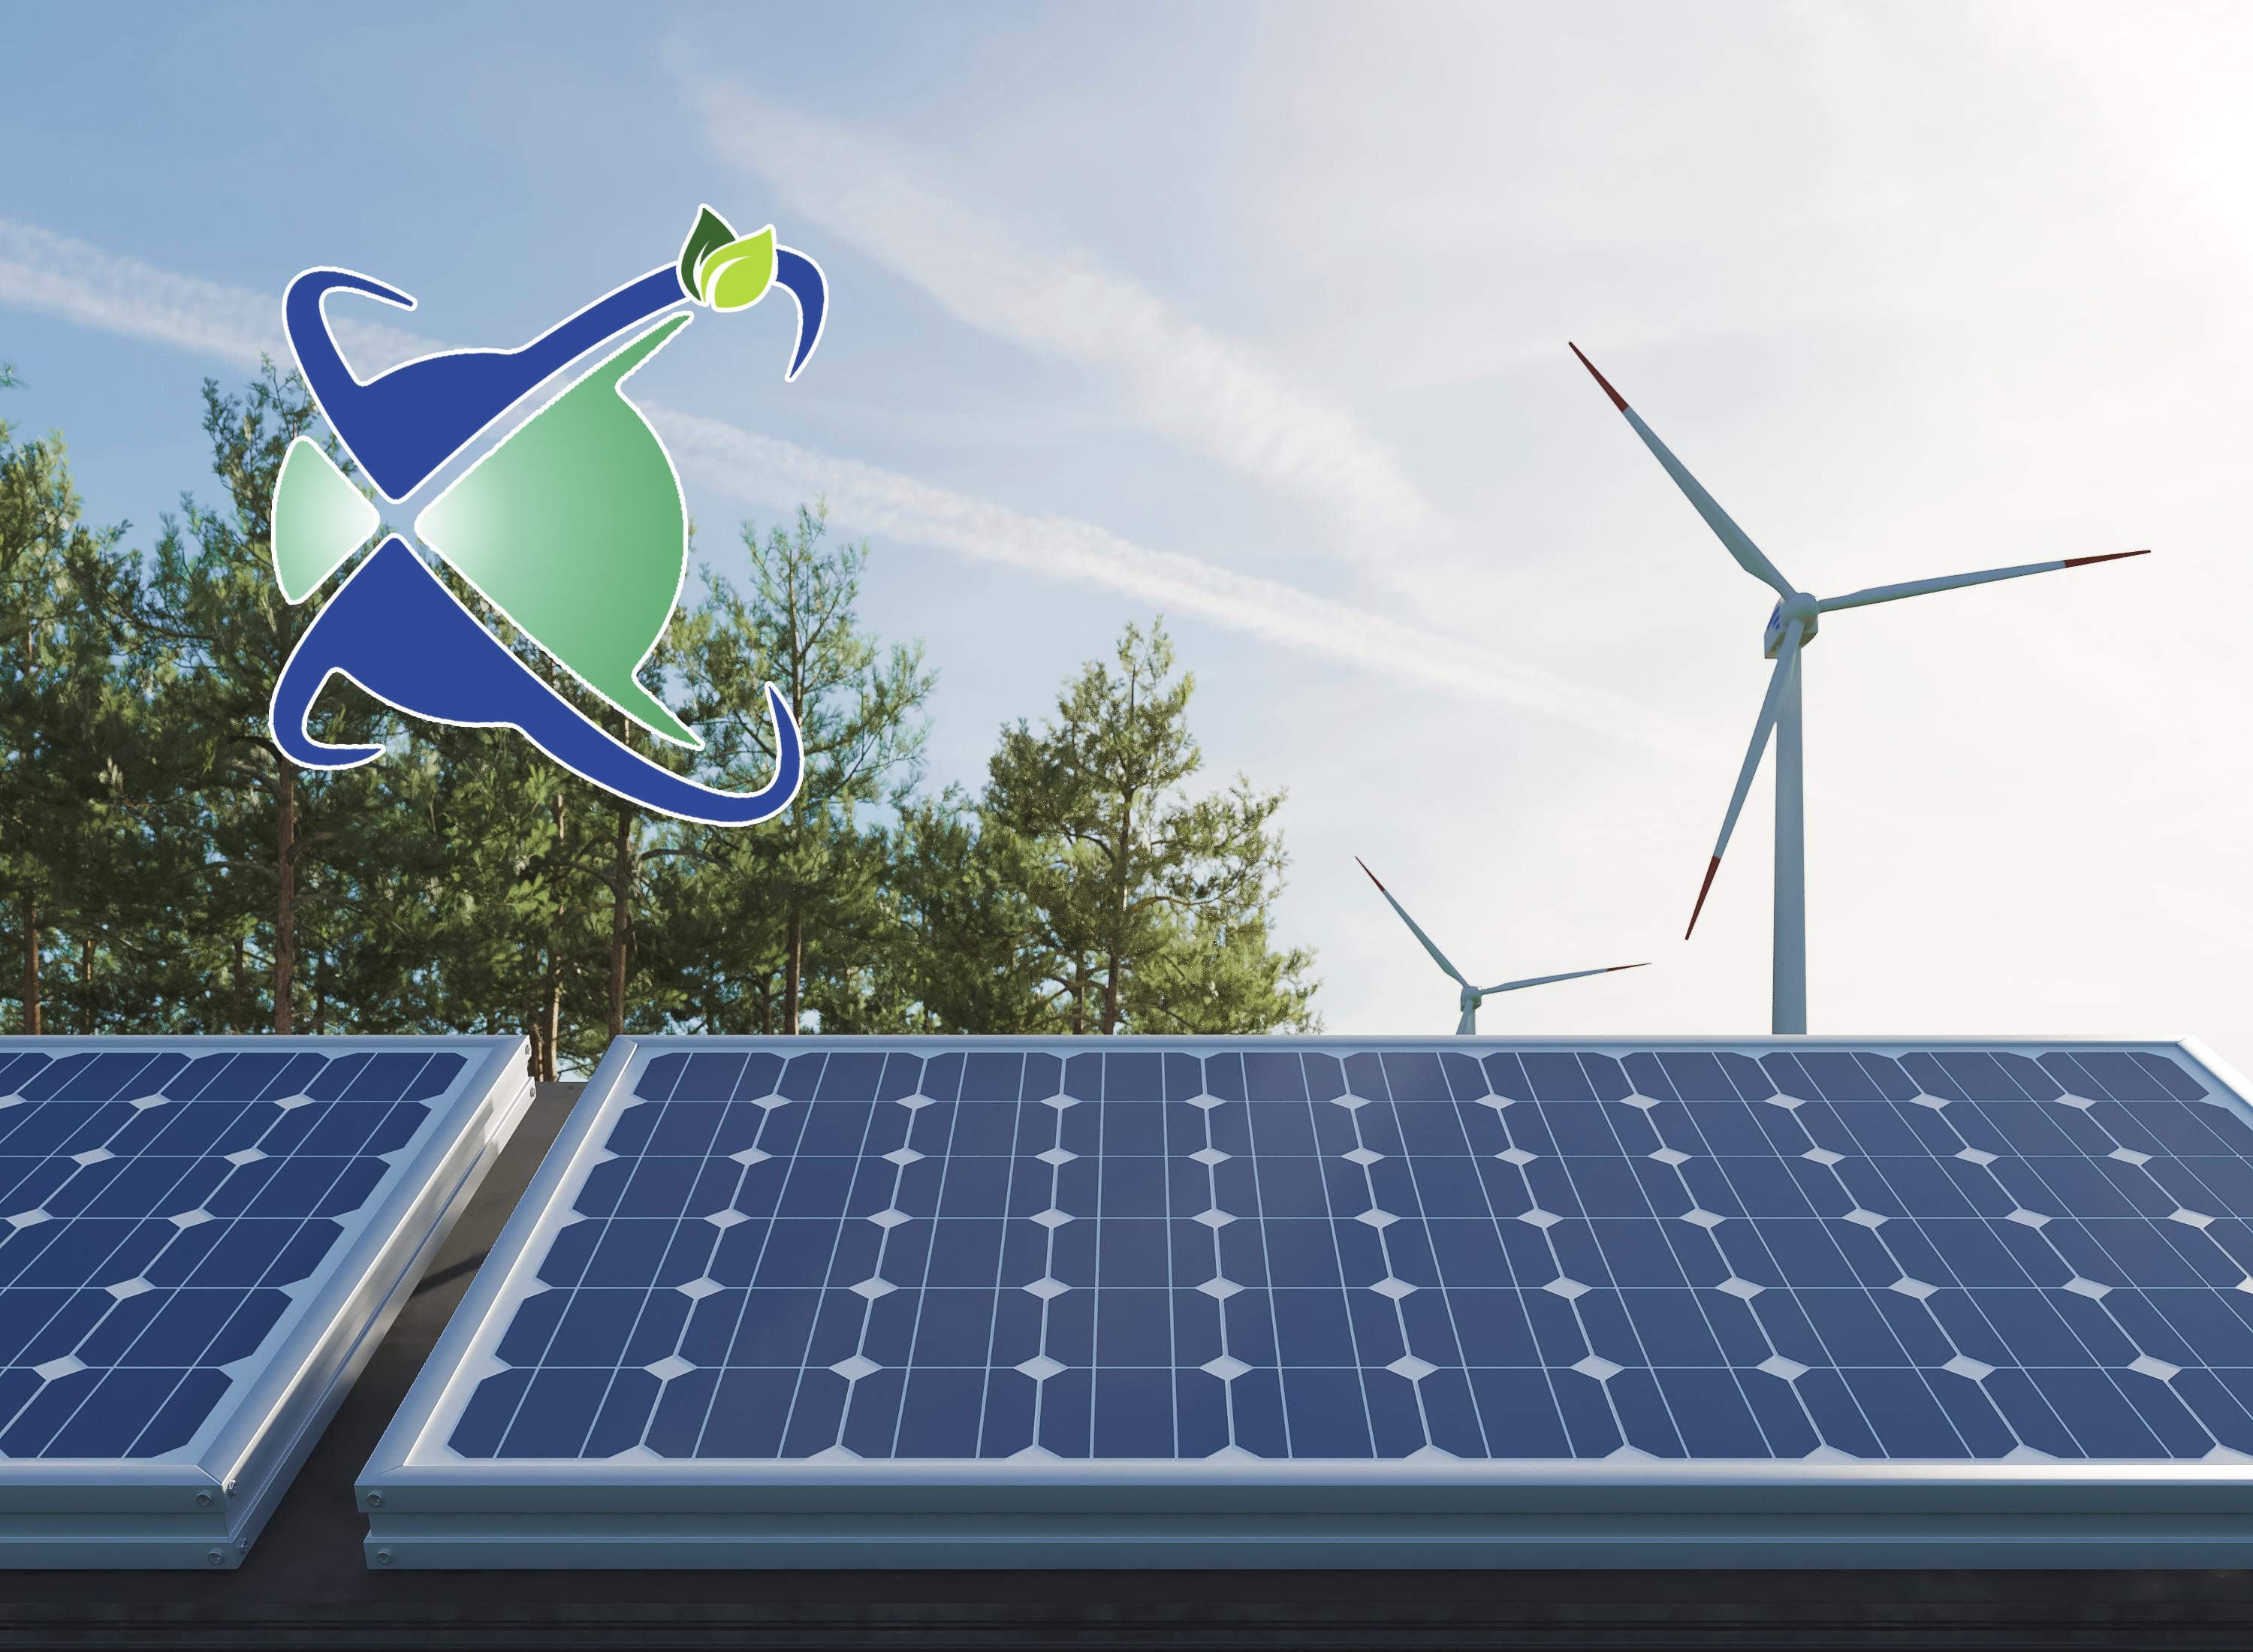 X Green Launches to Provide Renewable Energy Solutions to Businesses and Individuals